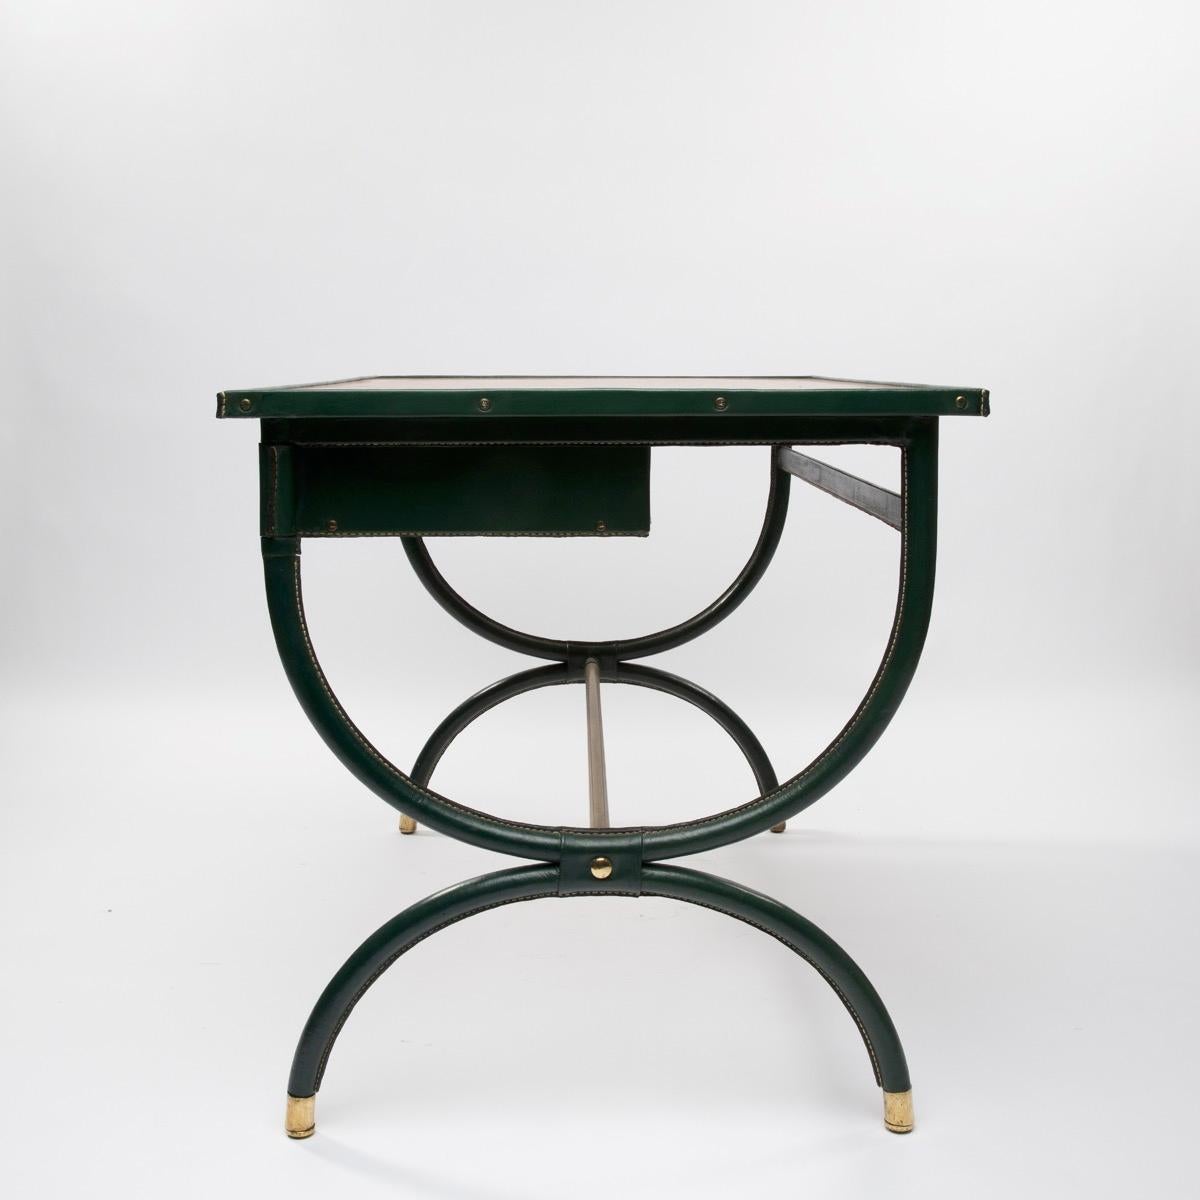 Mid-20th Century French Midcentury Desk with Armchair and Waste Paper Basket by Jacques Adnet